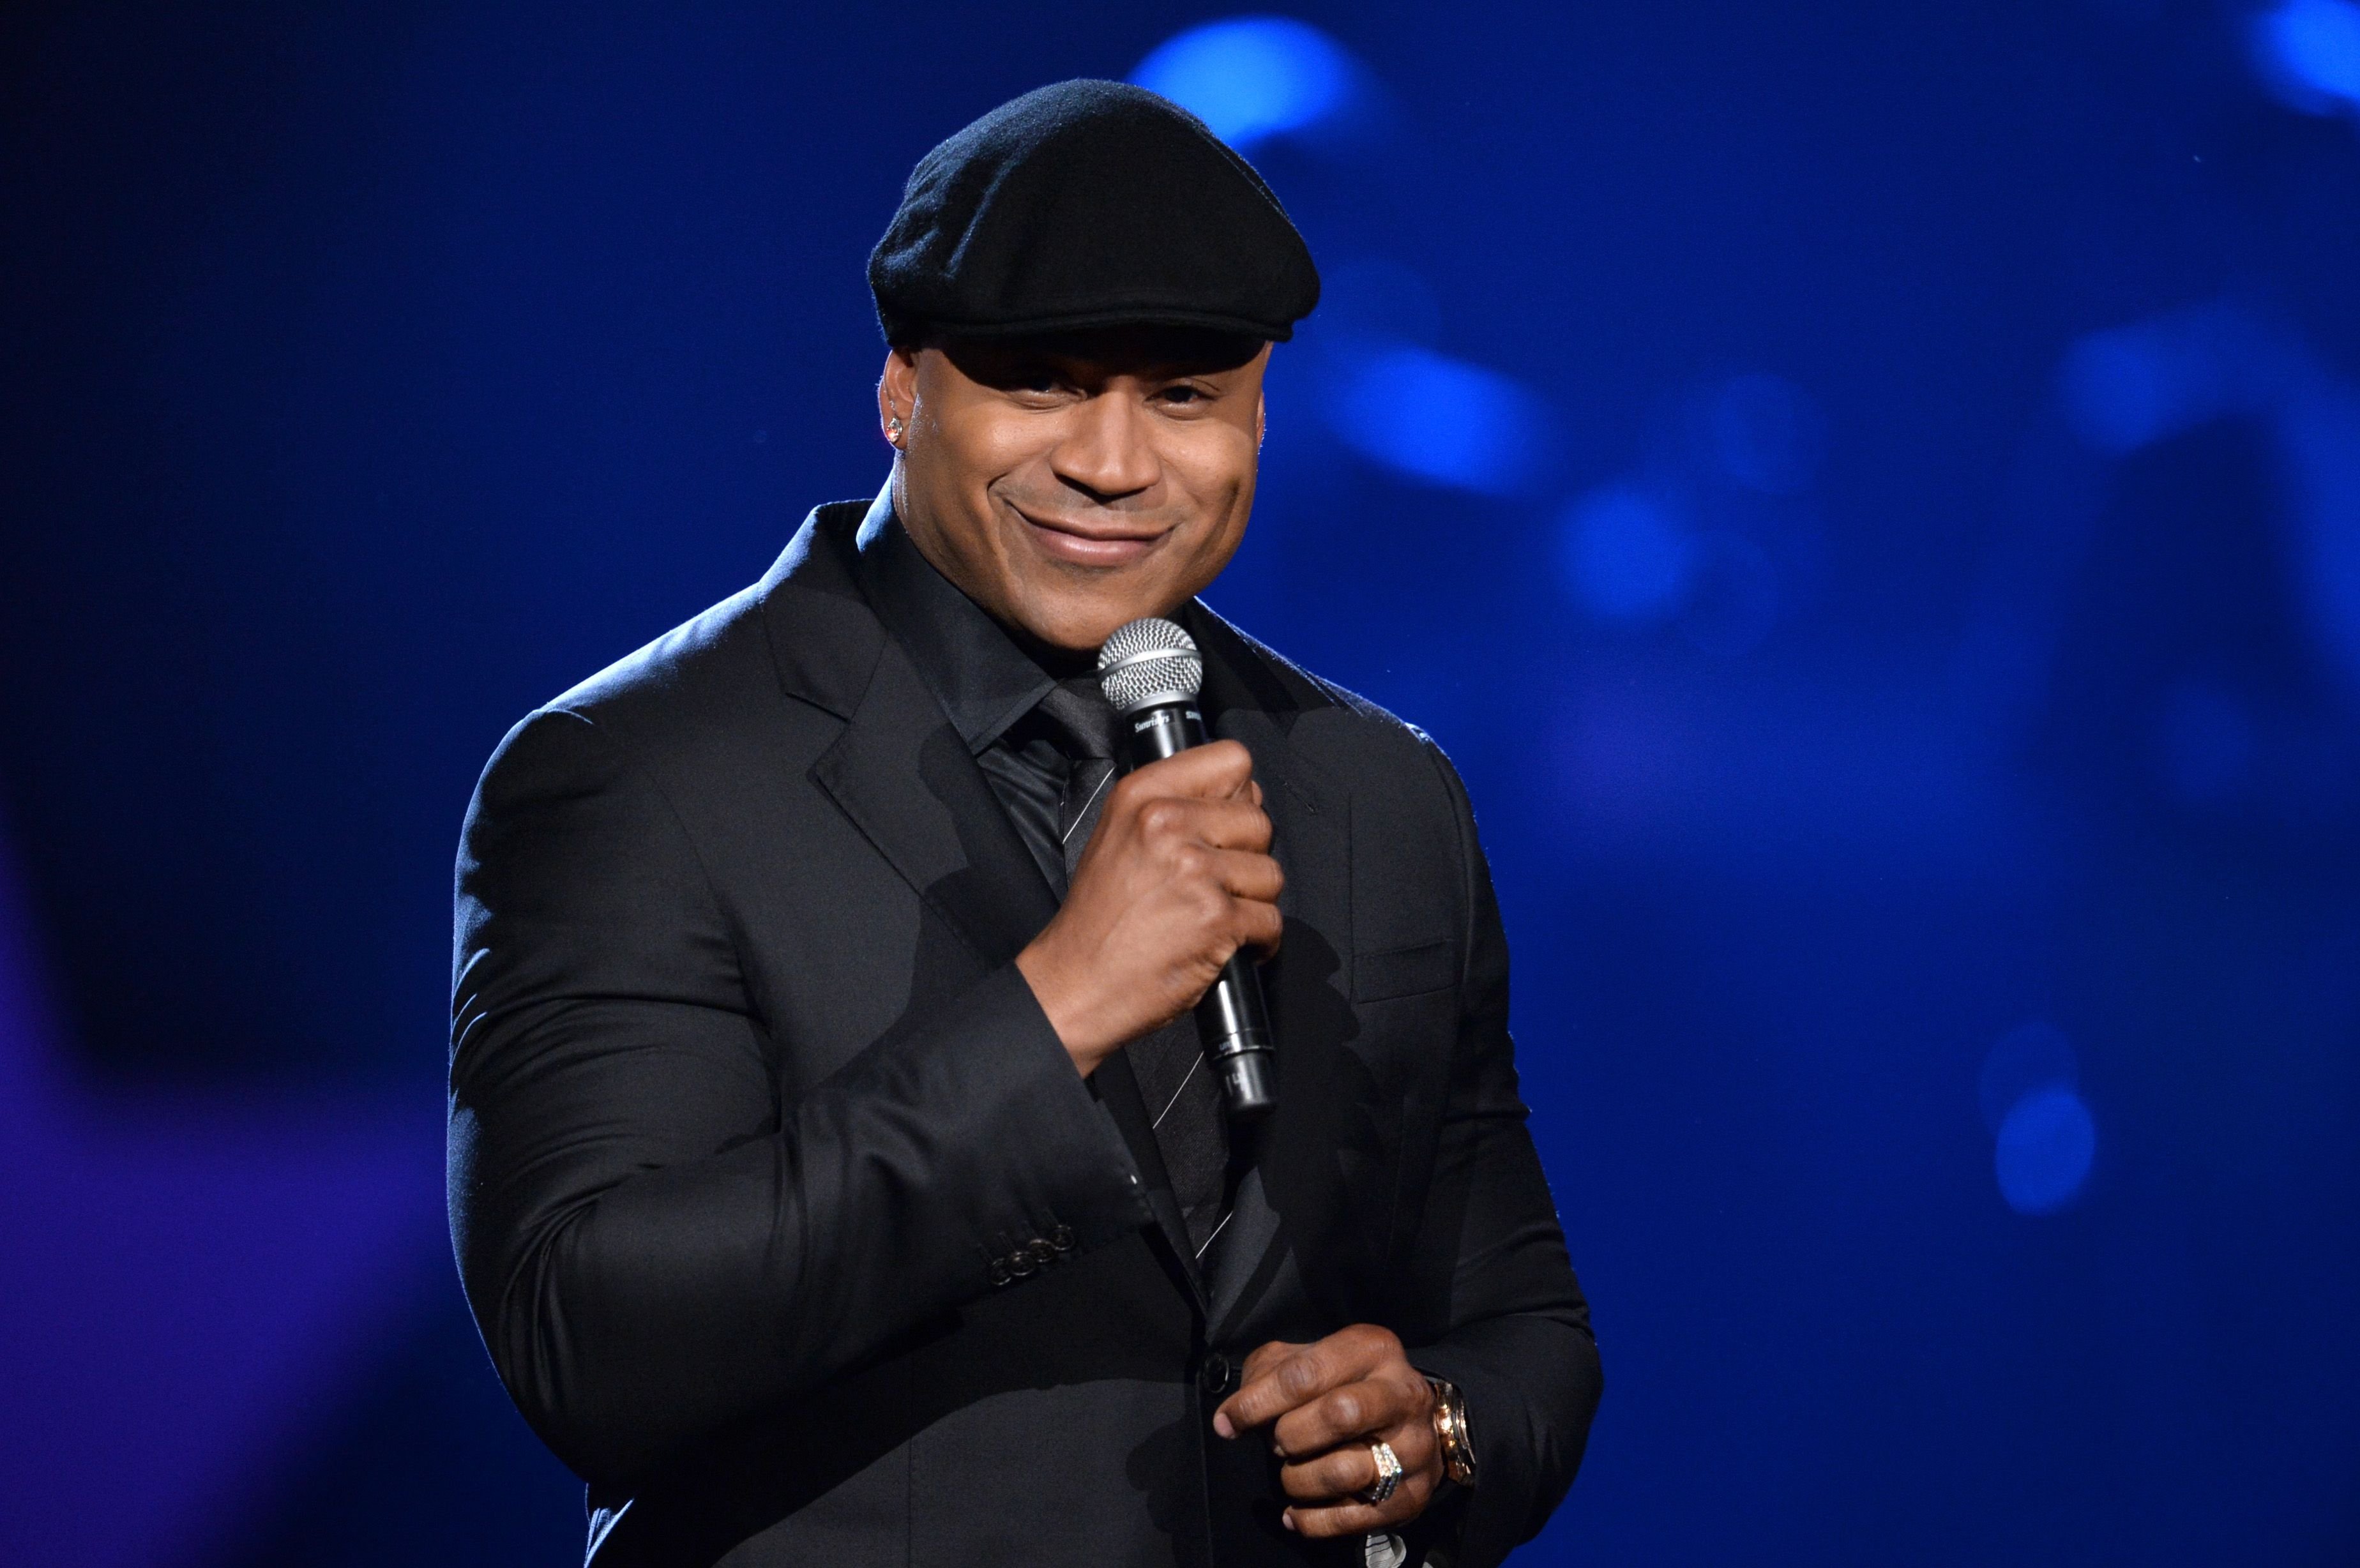 Host LL Cool J speaks on the stage in the course of "The Night That Changed America: A GRAMMY Salute To The Beatles"  the Los Angeles Convention Center on January 27, 2014 in California. | Photo: Getty Images